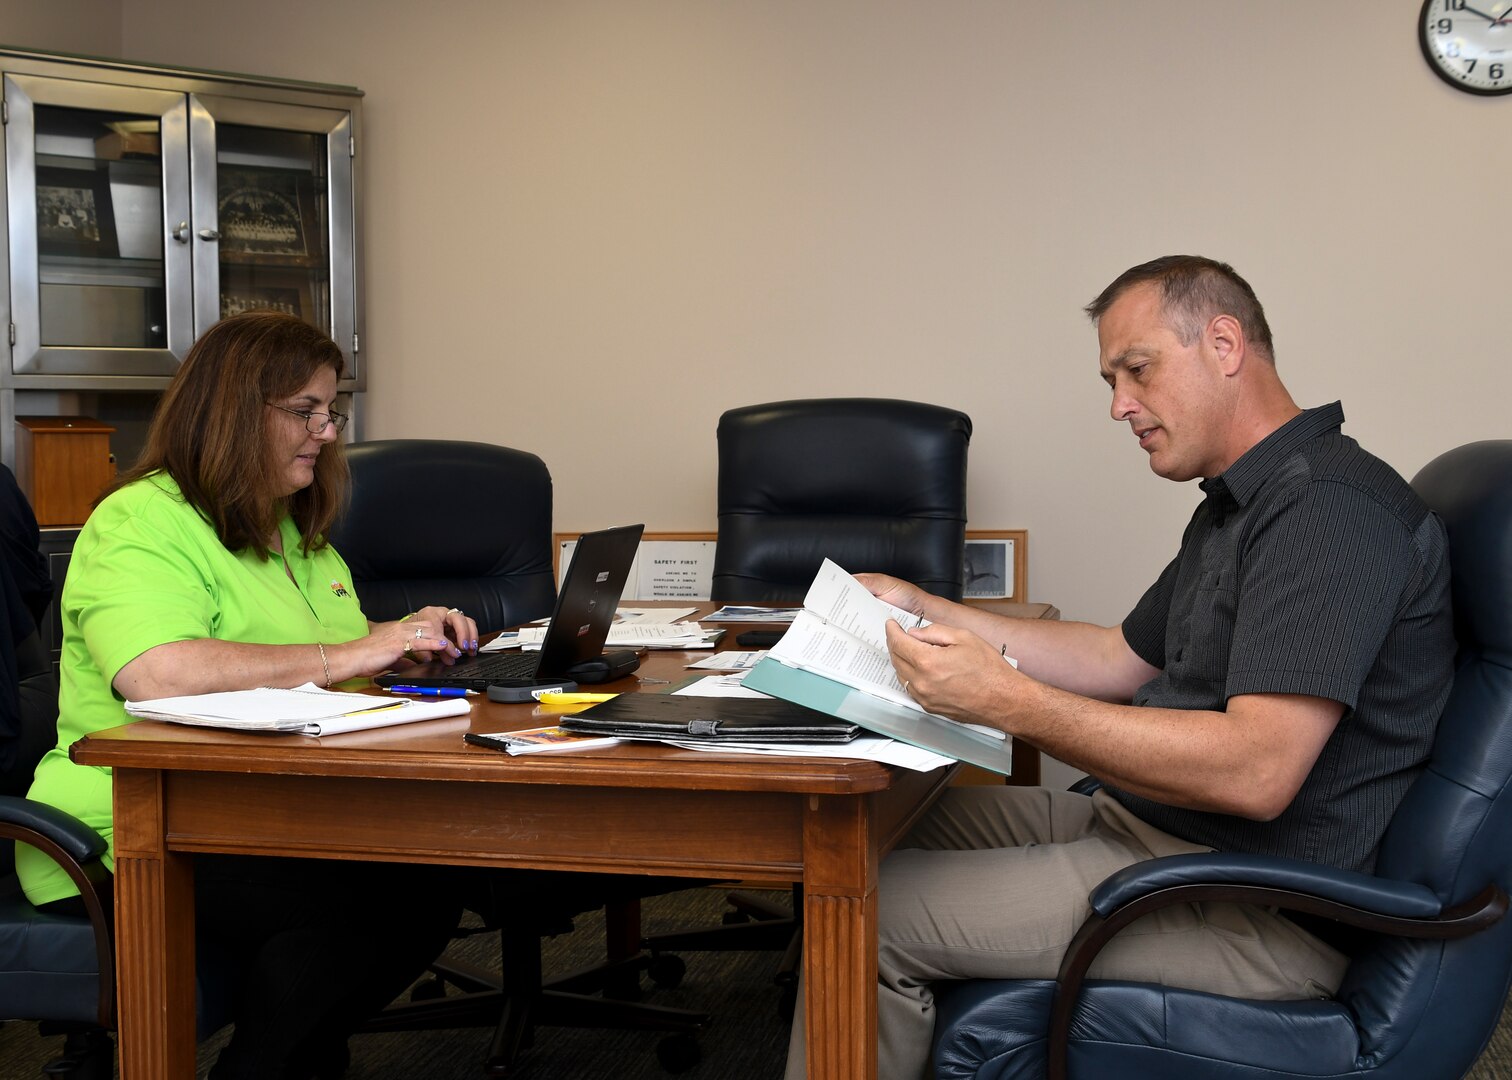 Man sitting at a desk with a woman while reviewing documents.